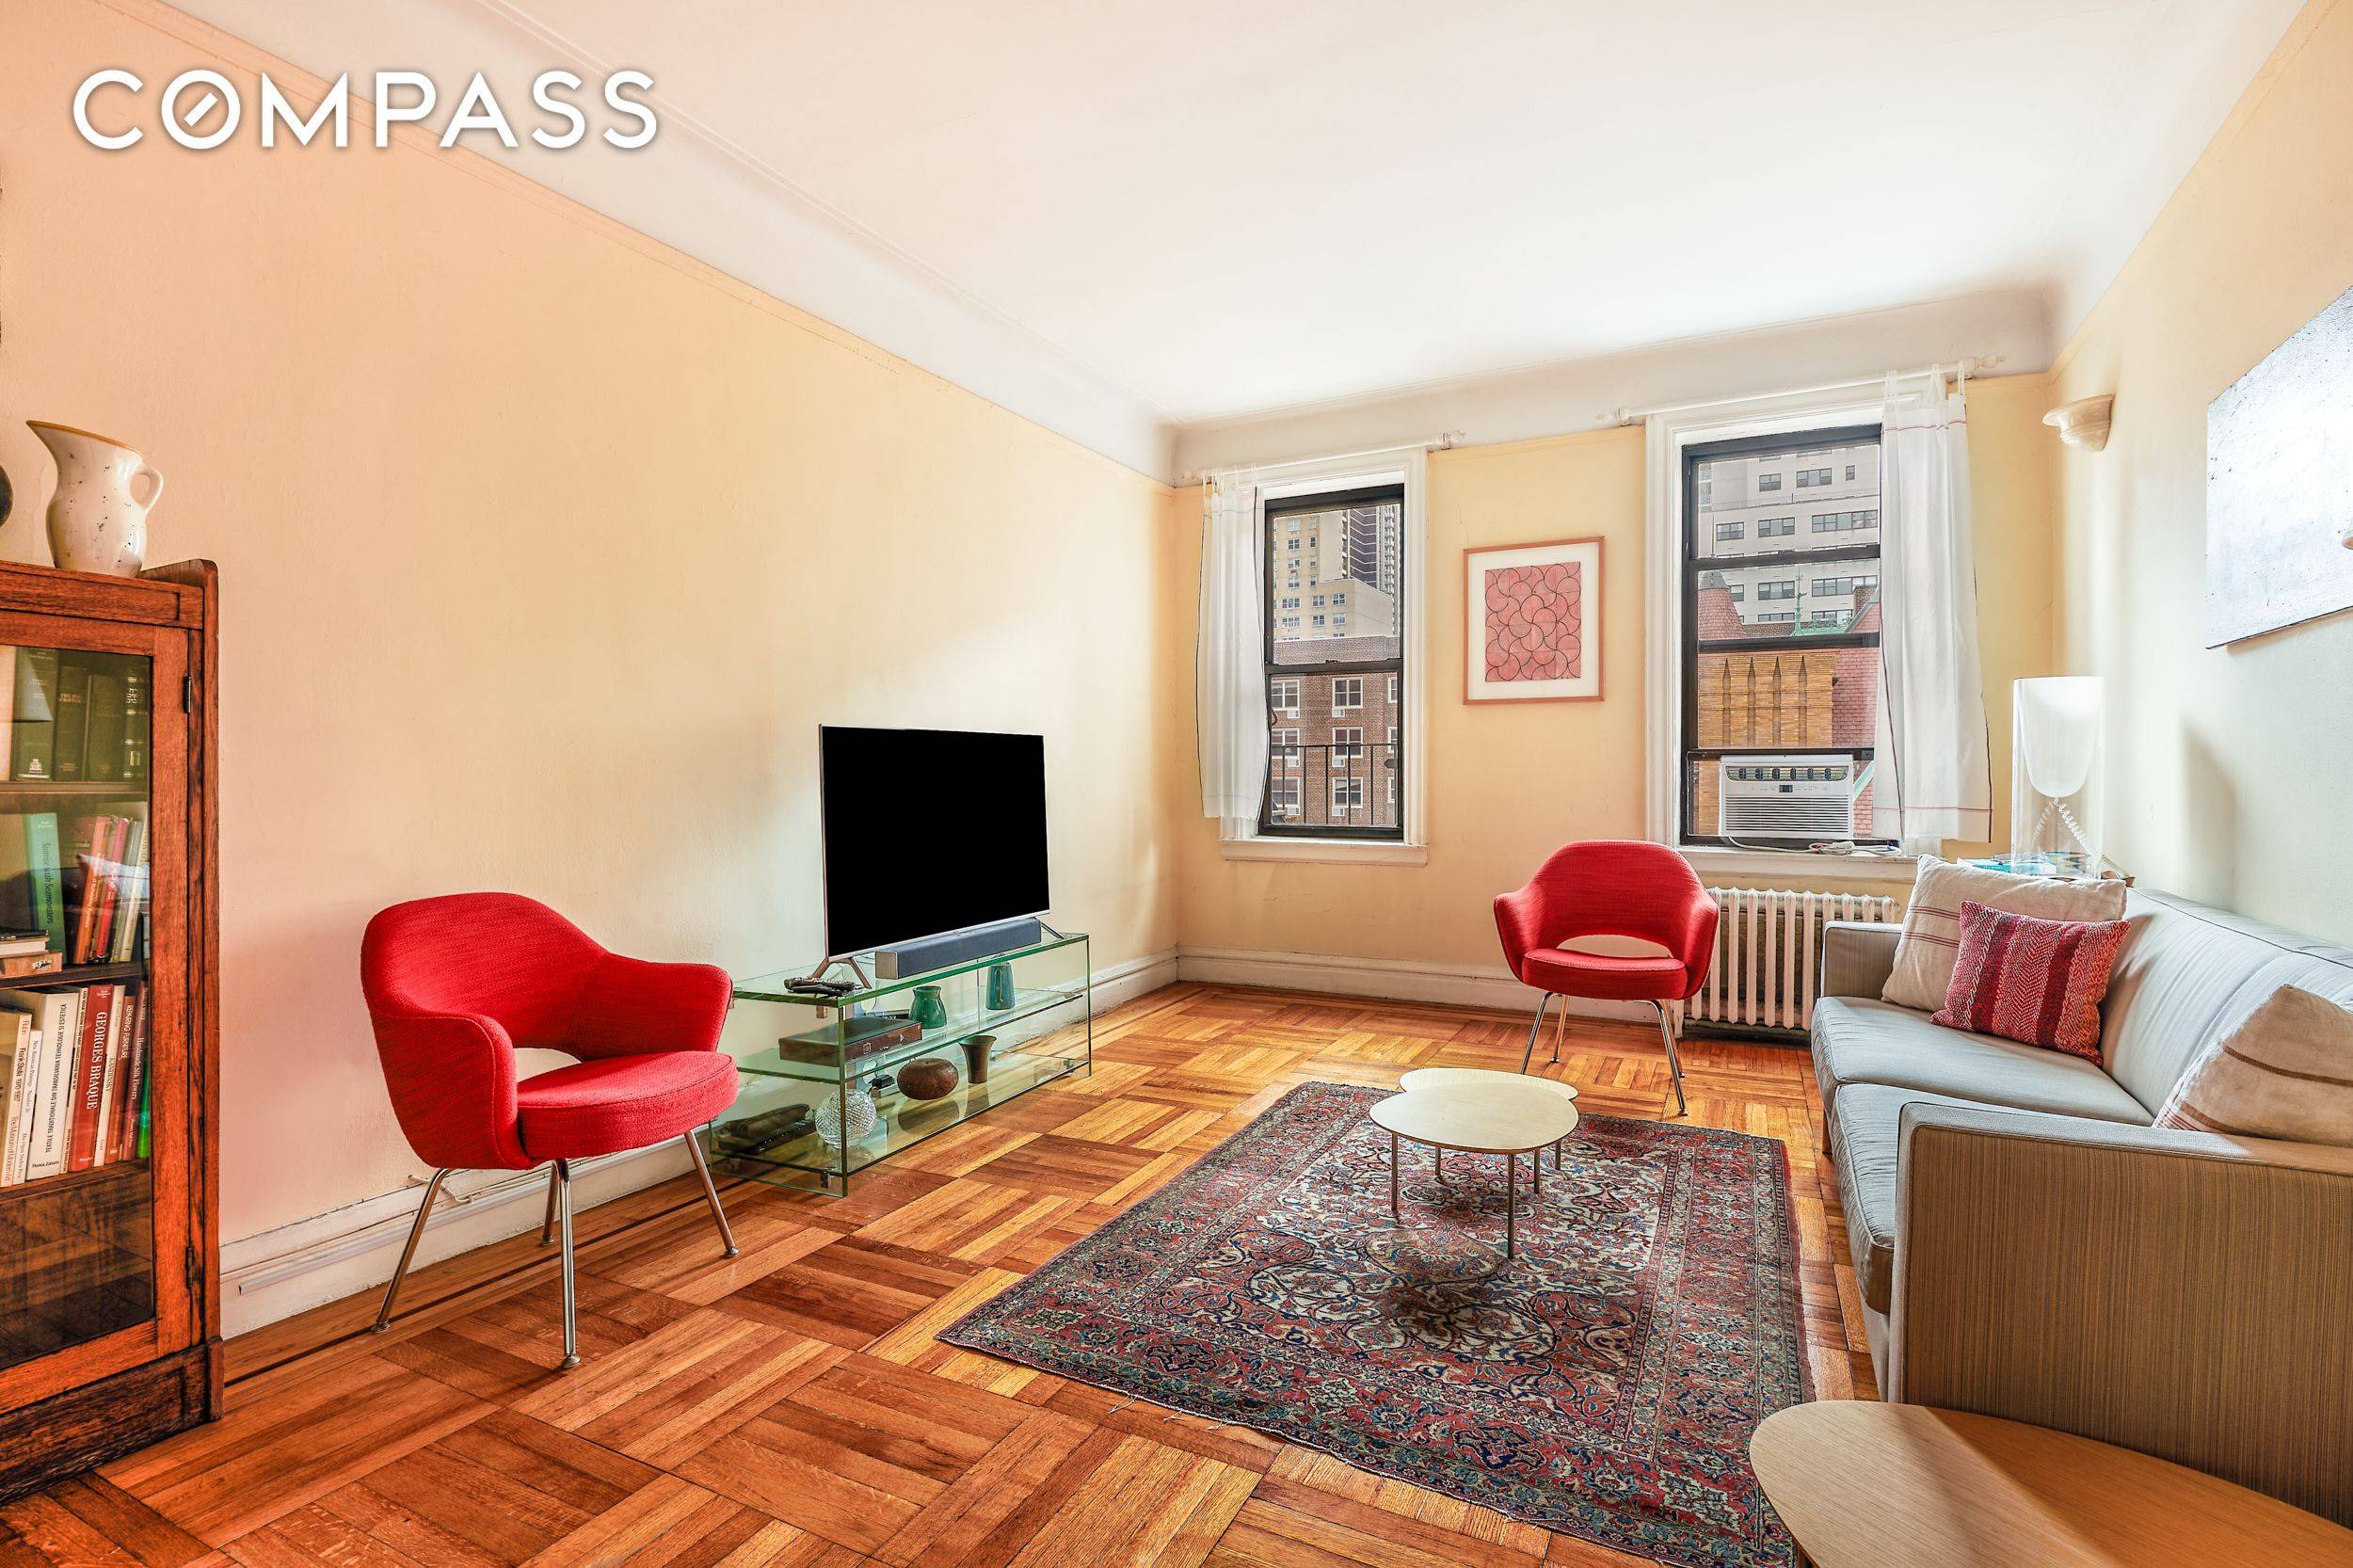 Upper East Side delight A bright, expansive, prewar 2 bedroom 1 bathroom home on a charming tree lined block.